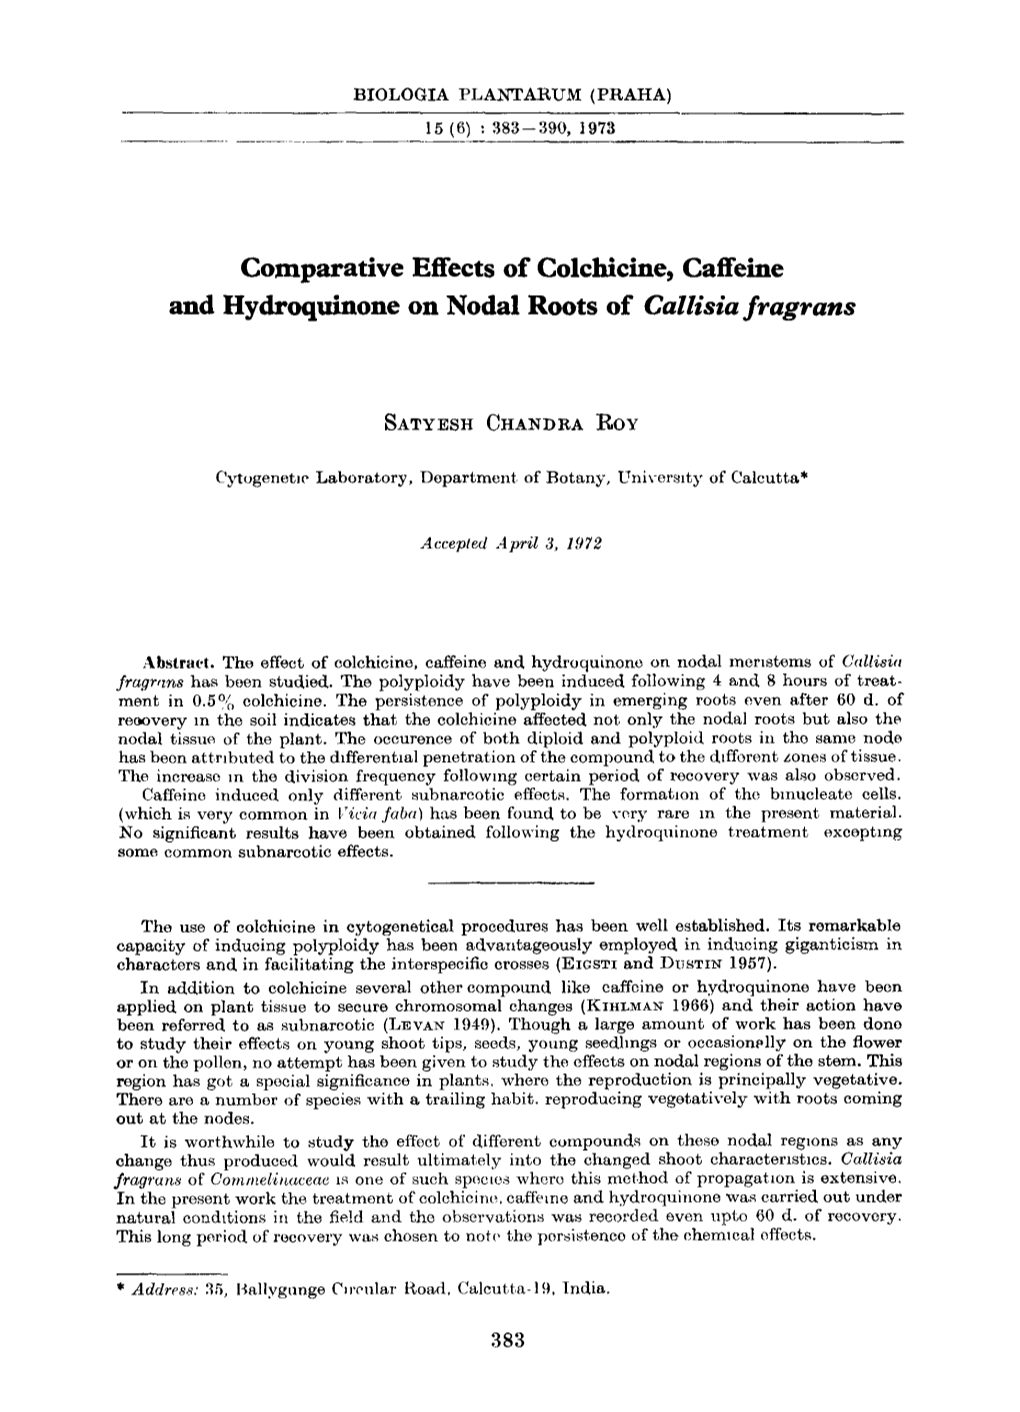 Comparative Effects of Colchicine, Caffeine and Hydroquinone on Nodal Roots of Callisia Fragrans